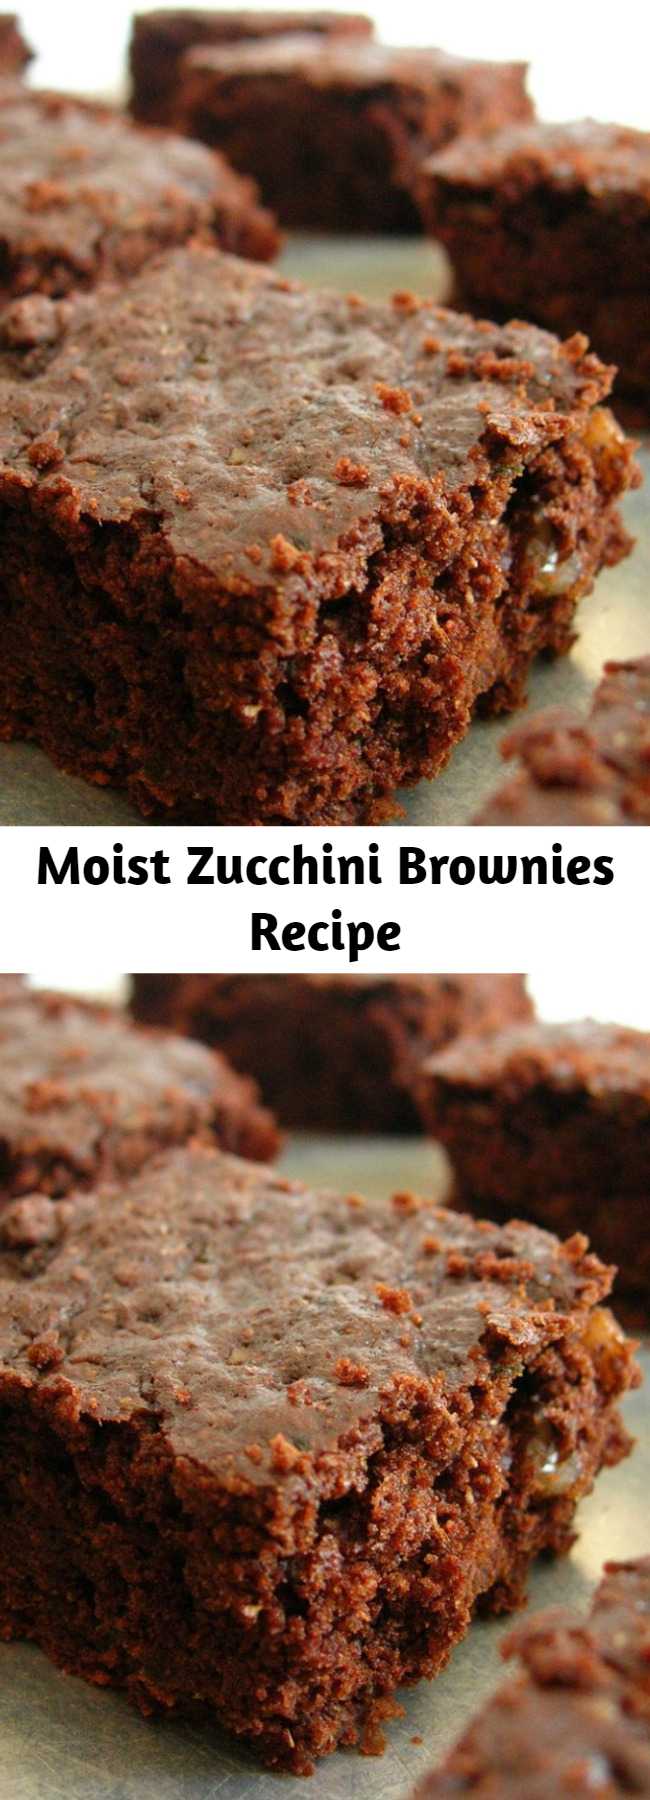 Moist Zucchini Brownies Recipe - Moist chocolate brownies with frosting!